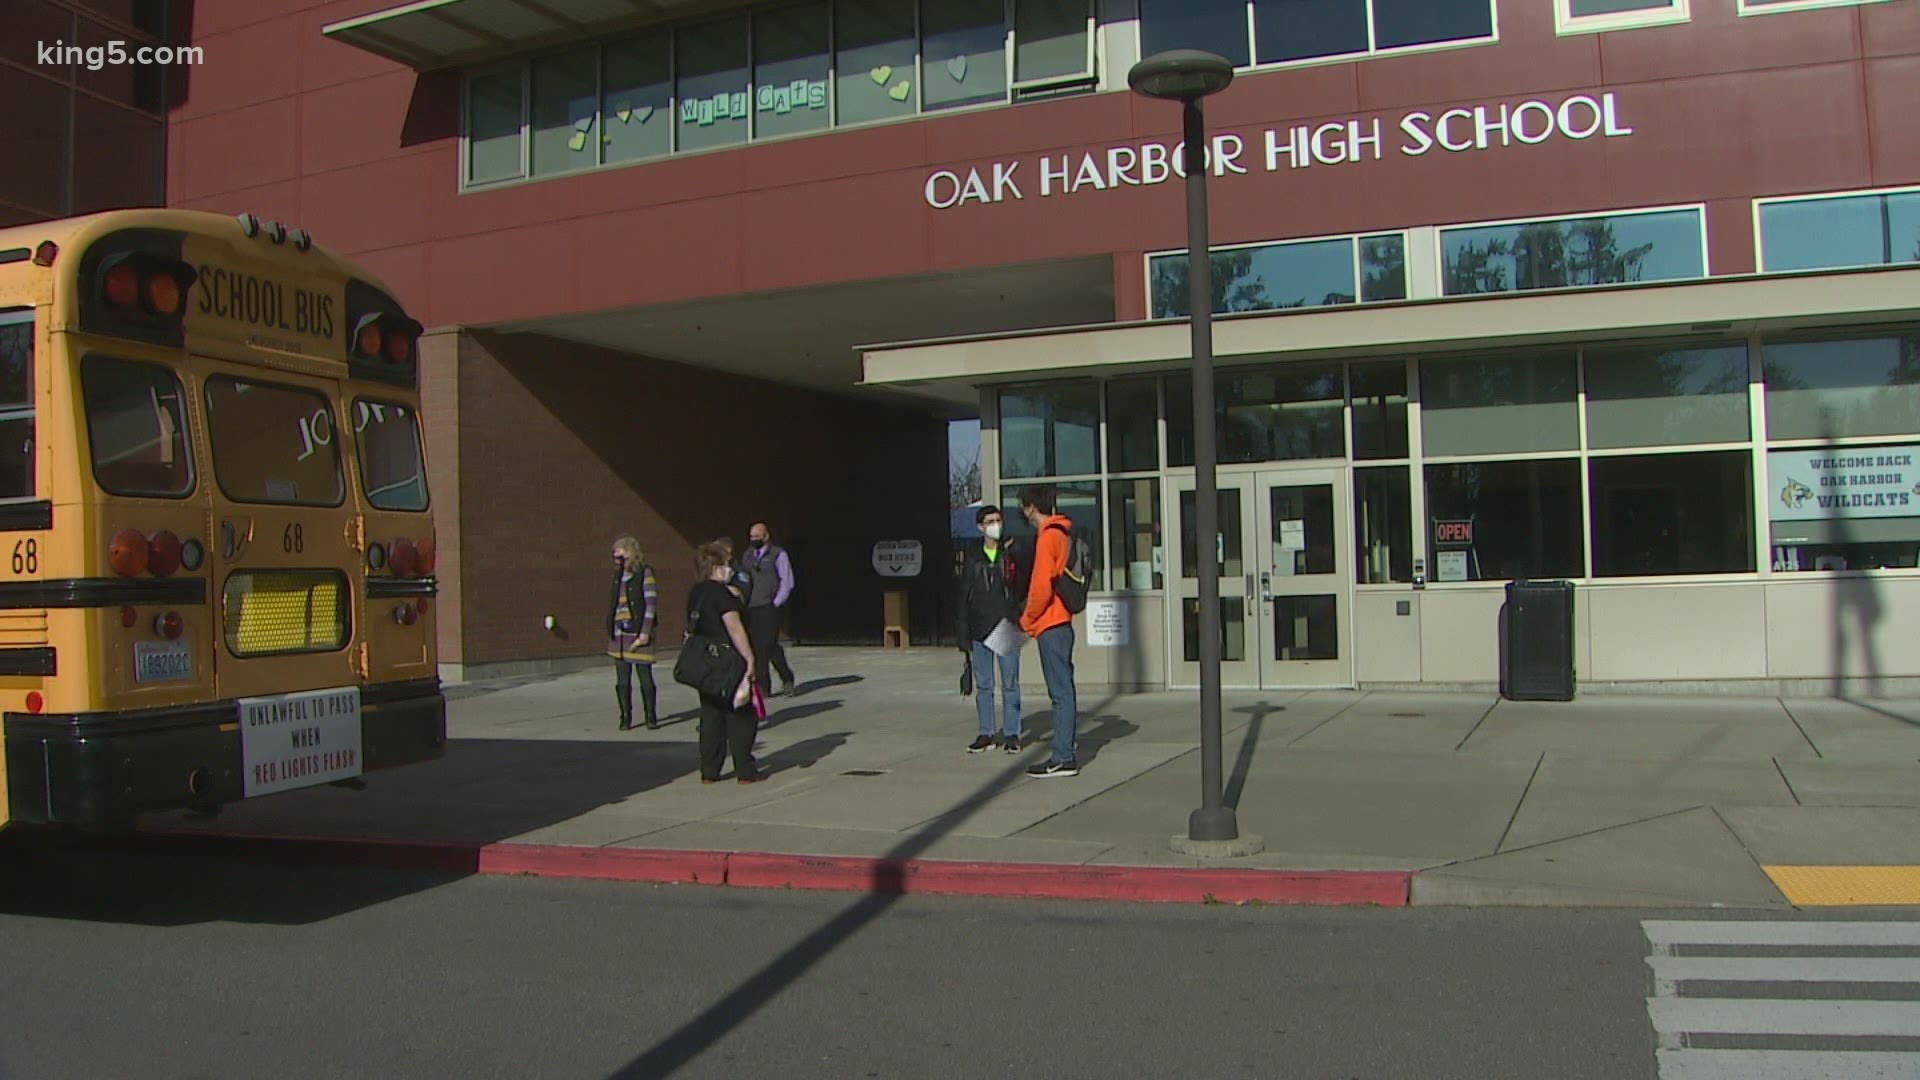 With 5,900 students, the Oak Harbor School District becomes the biggest in western Washington to return to in-person learning.